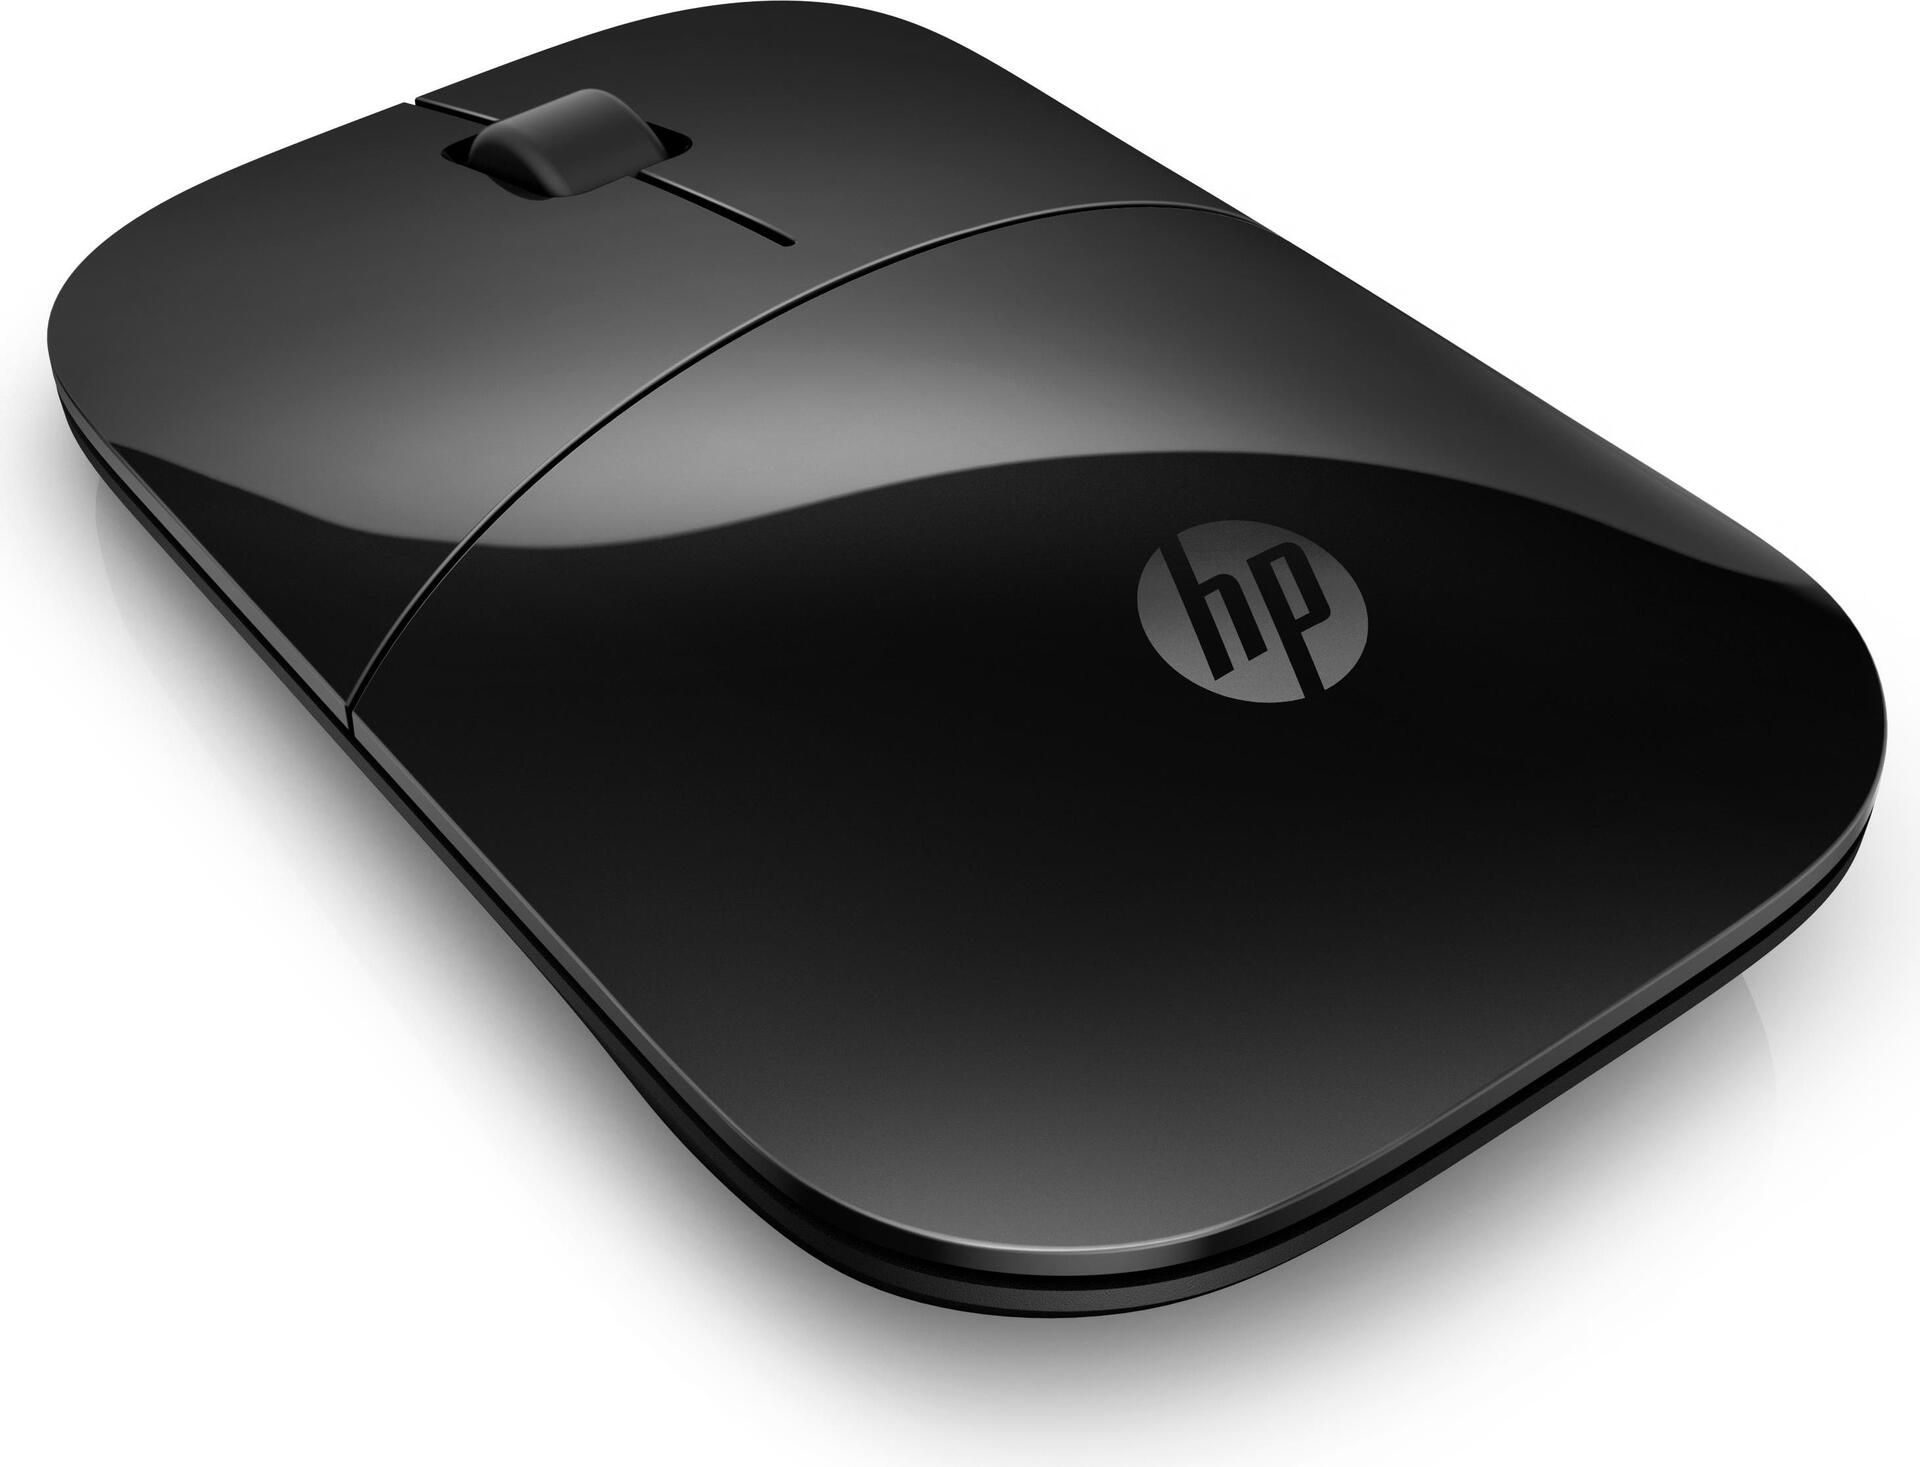 HP Inc. Z3700 BLACK WIRELESS ENGLISH LOCALIZATION IN EUROPE- V0L79AA#ABB MOUSE